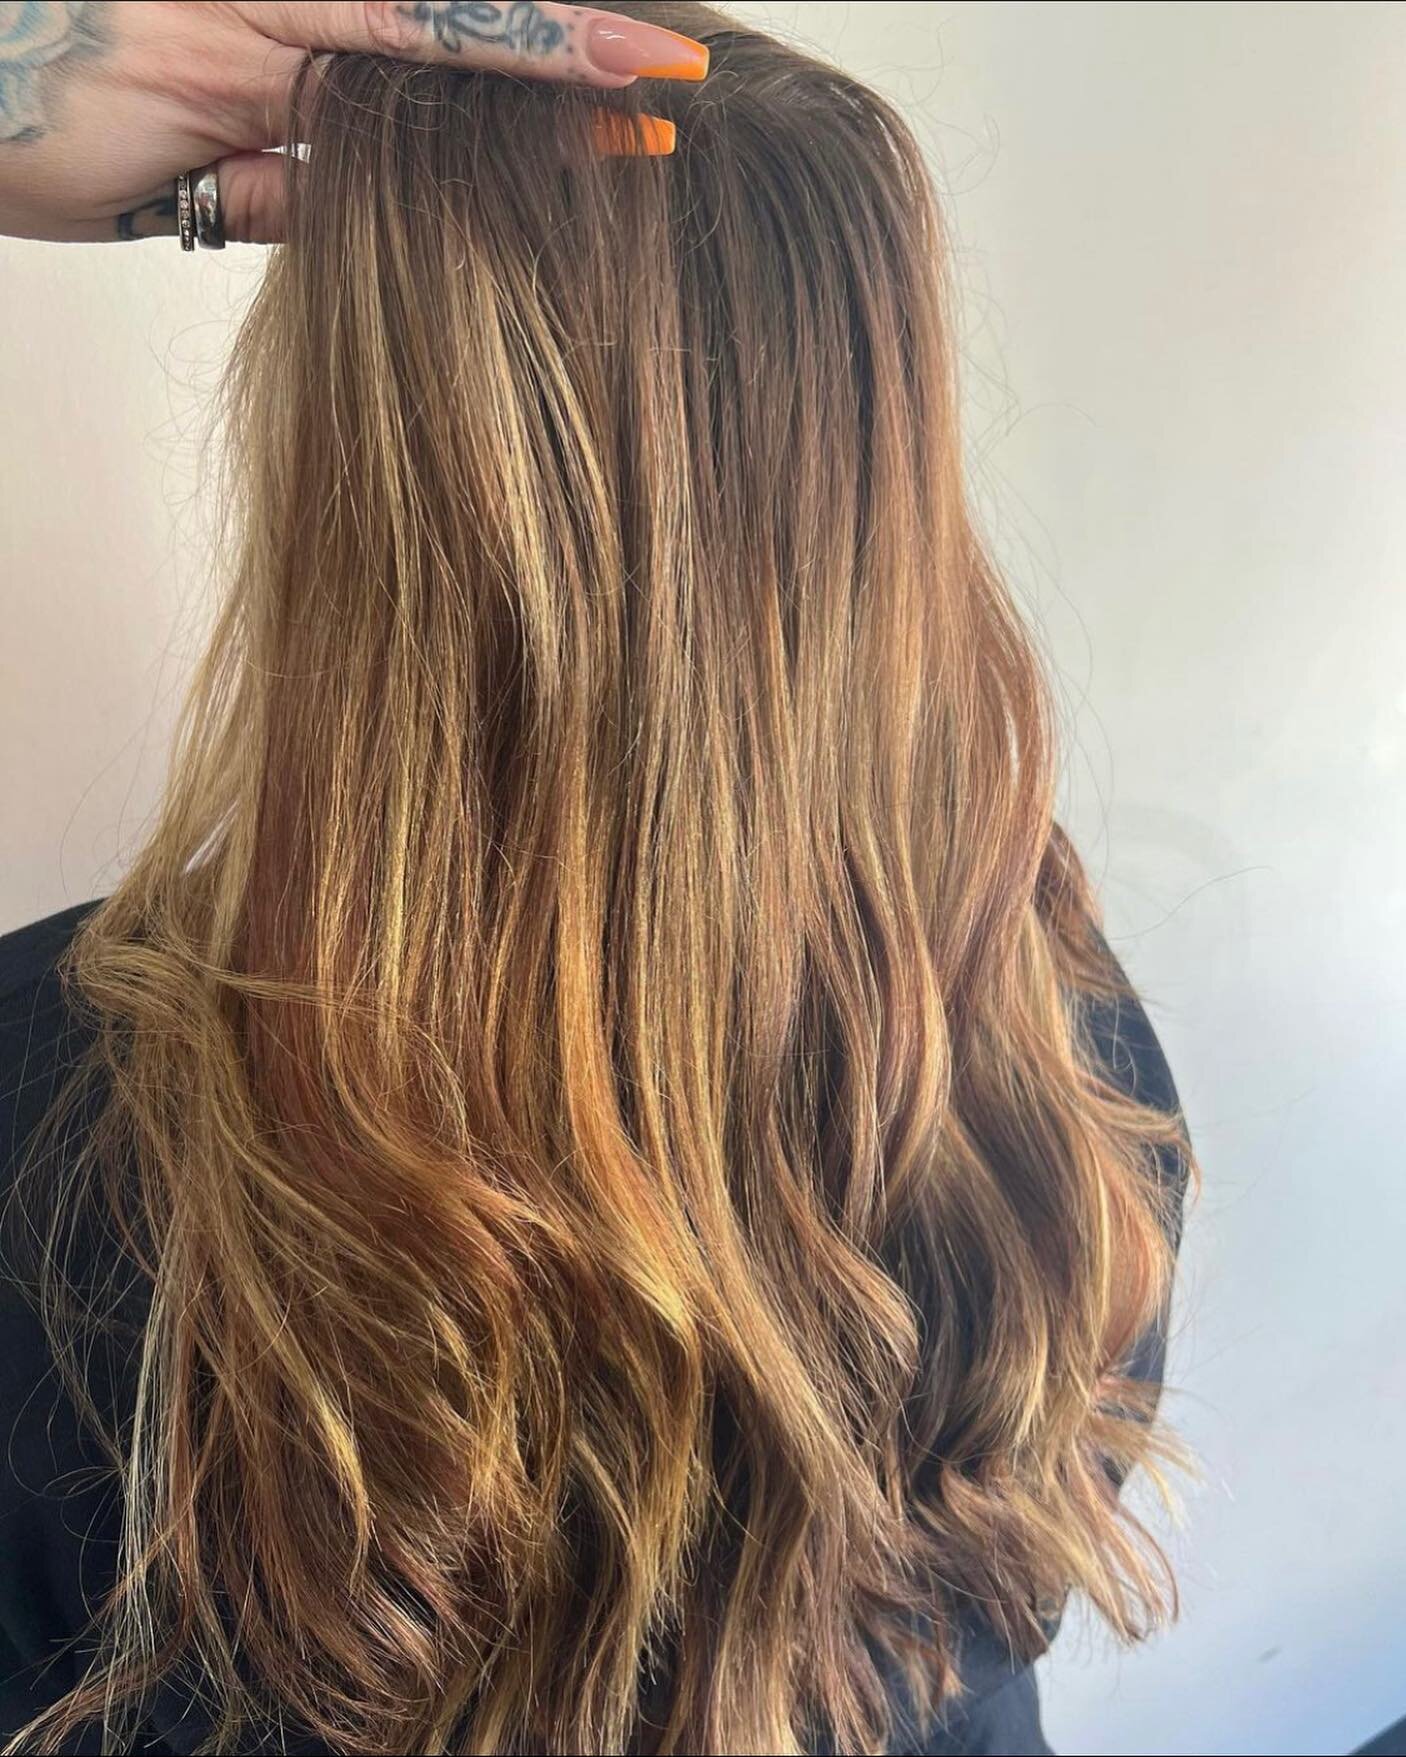 Hair by @hairbykaileyy 
.
.
.

 She came in with so many different colors in her hair and a black band all the way around towards bottom of her hair..... I'd say this is such a big difference! 
.
#haircolor #haircolorist #hilights #balayage #colorcor